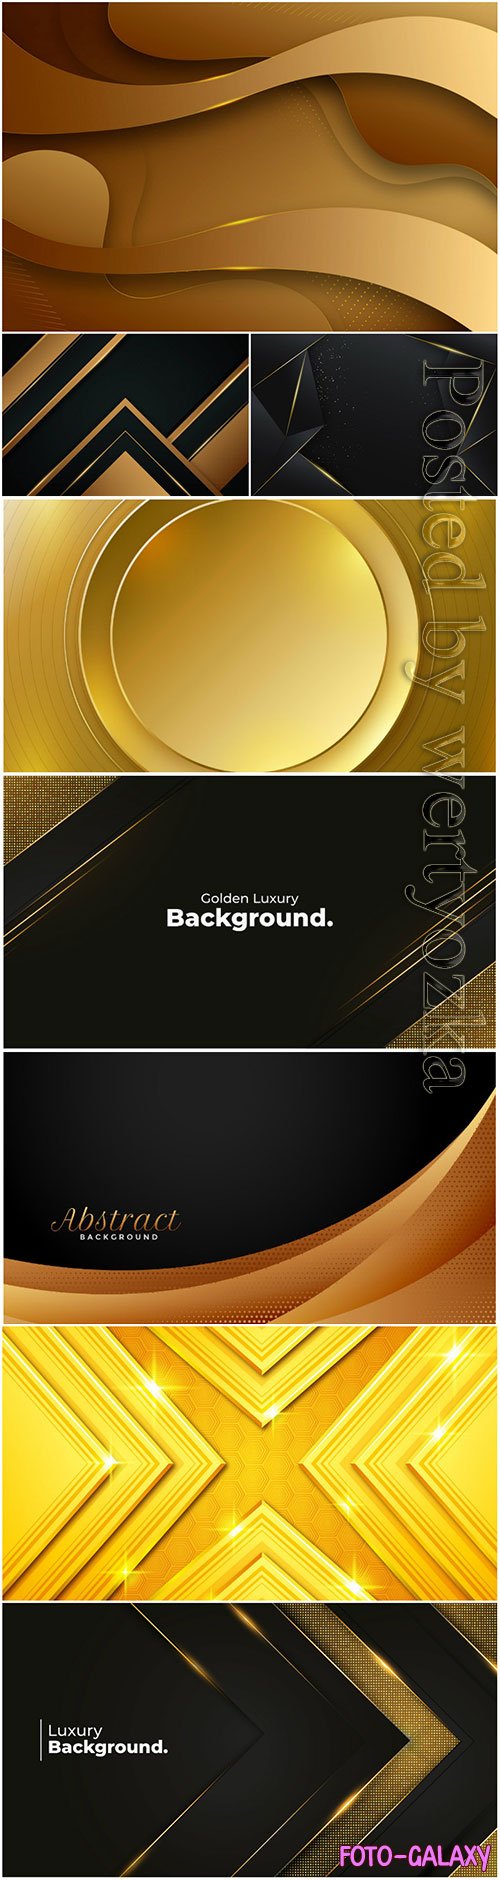 Vector backgrounds with gold decor